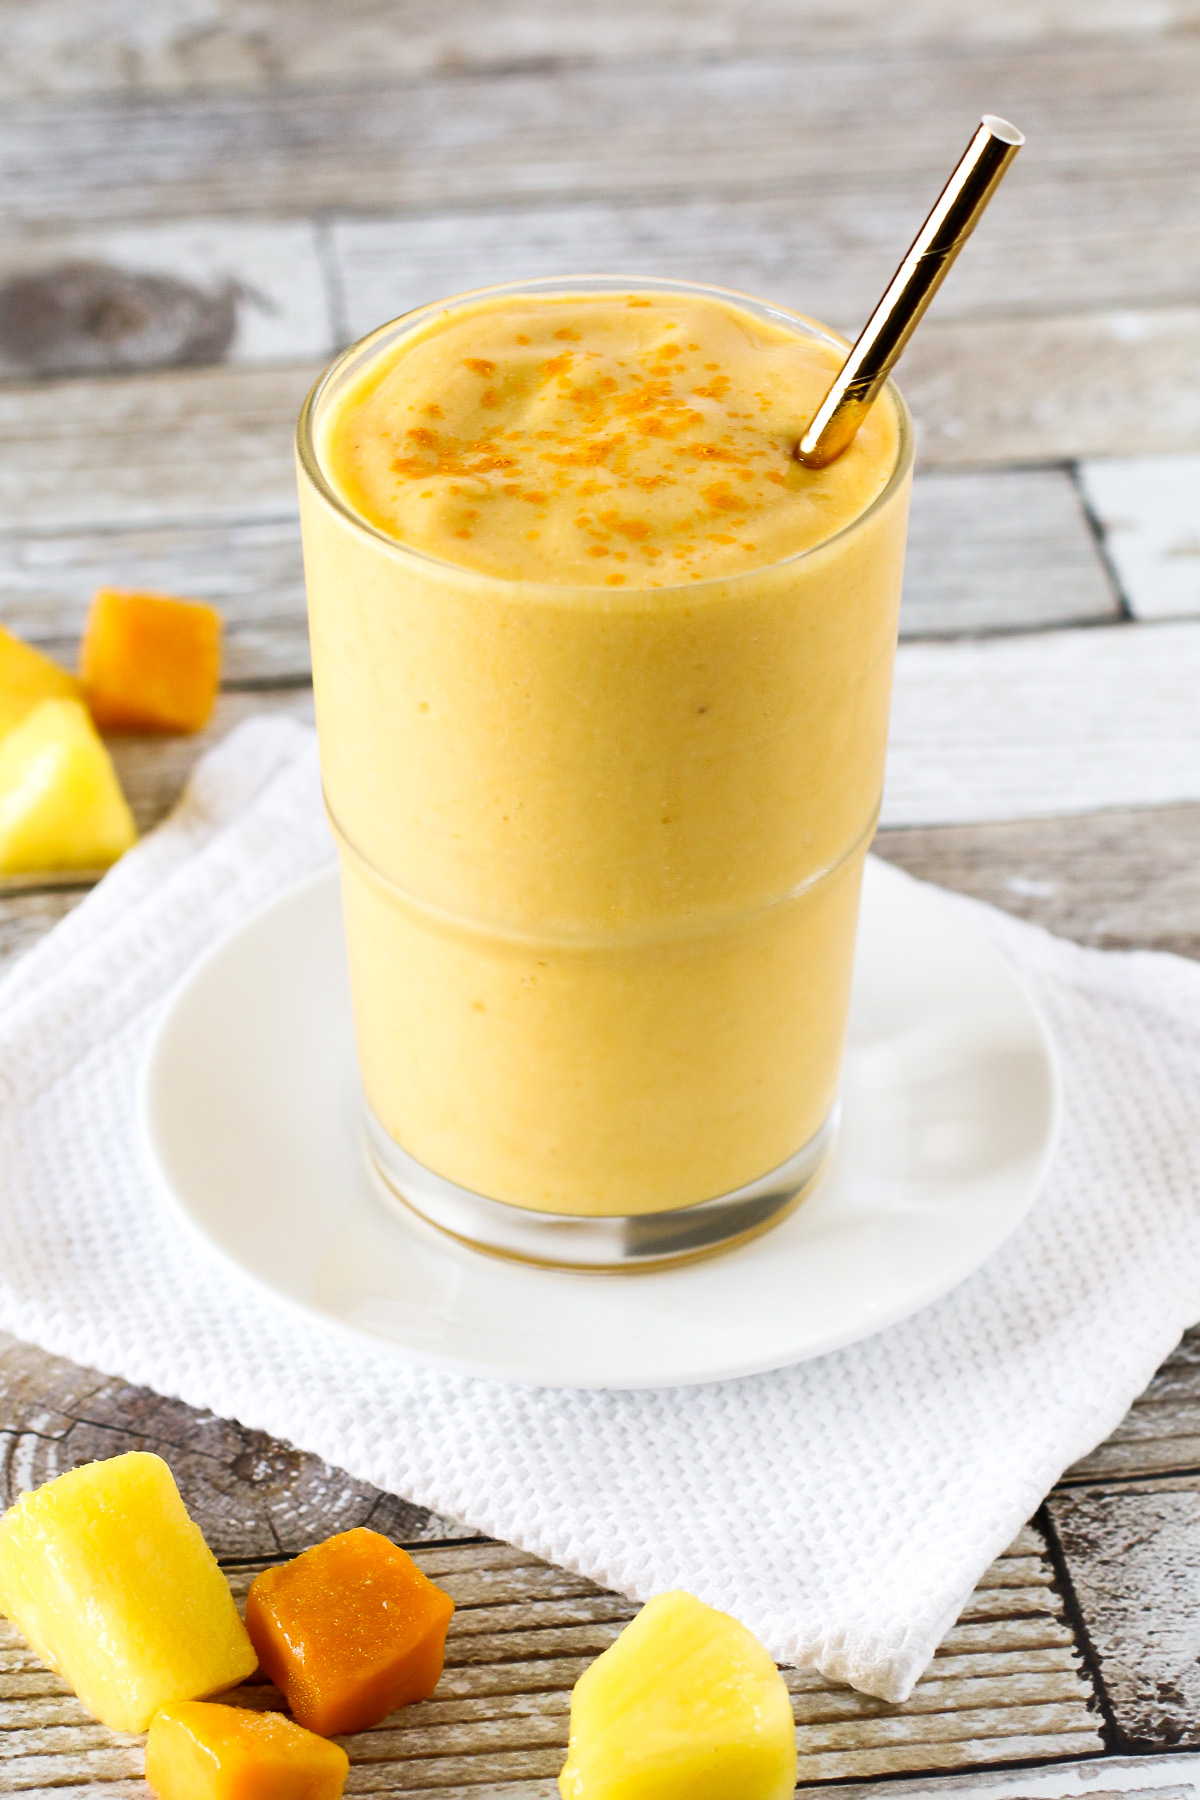 Dairy Free Golden Turmeric Smoothie. Made with frozen tropical fruit, coconut milk, turmeric and ginger. So many good things!